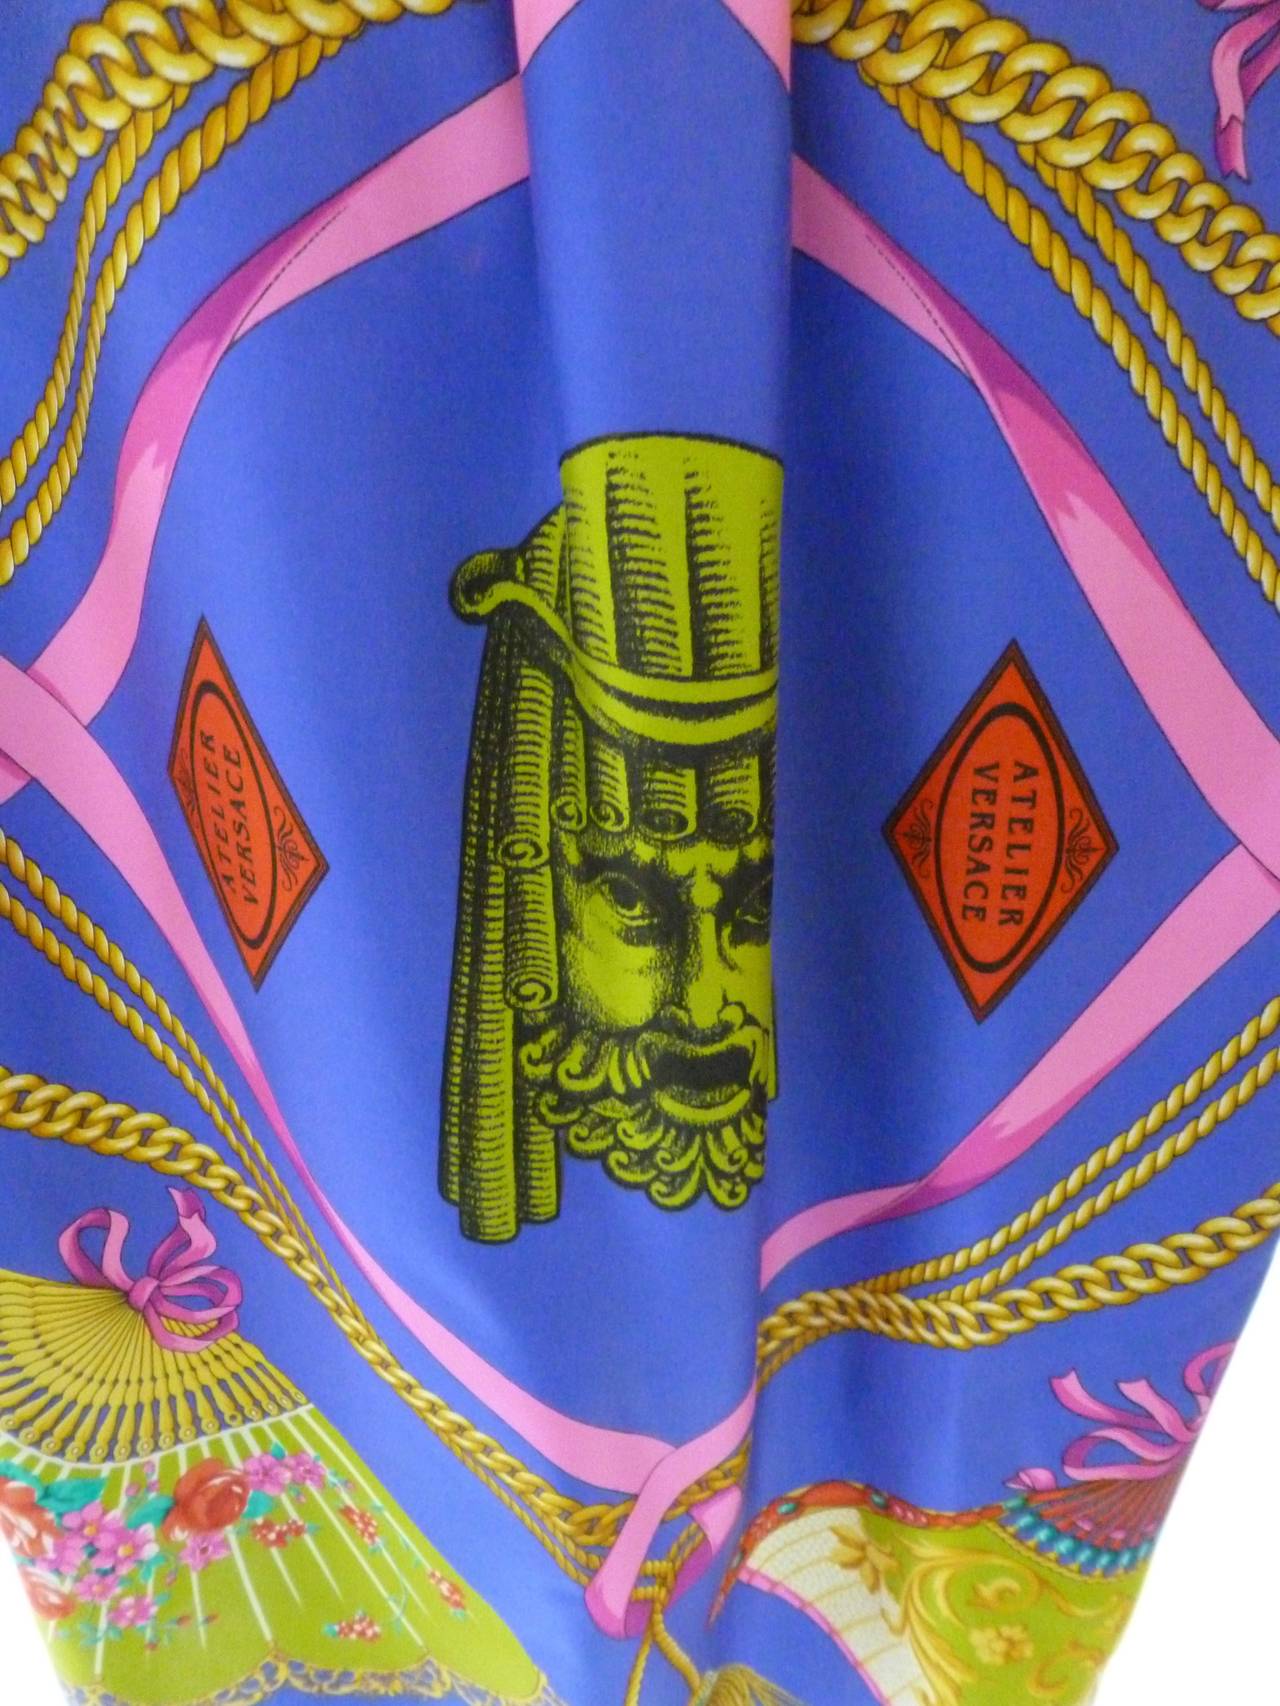 Gianni Versace Couture Oversized Silk Printed Blouse Spring 1991 In Excellent Condition For Sale In W1, GB